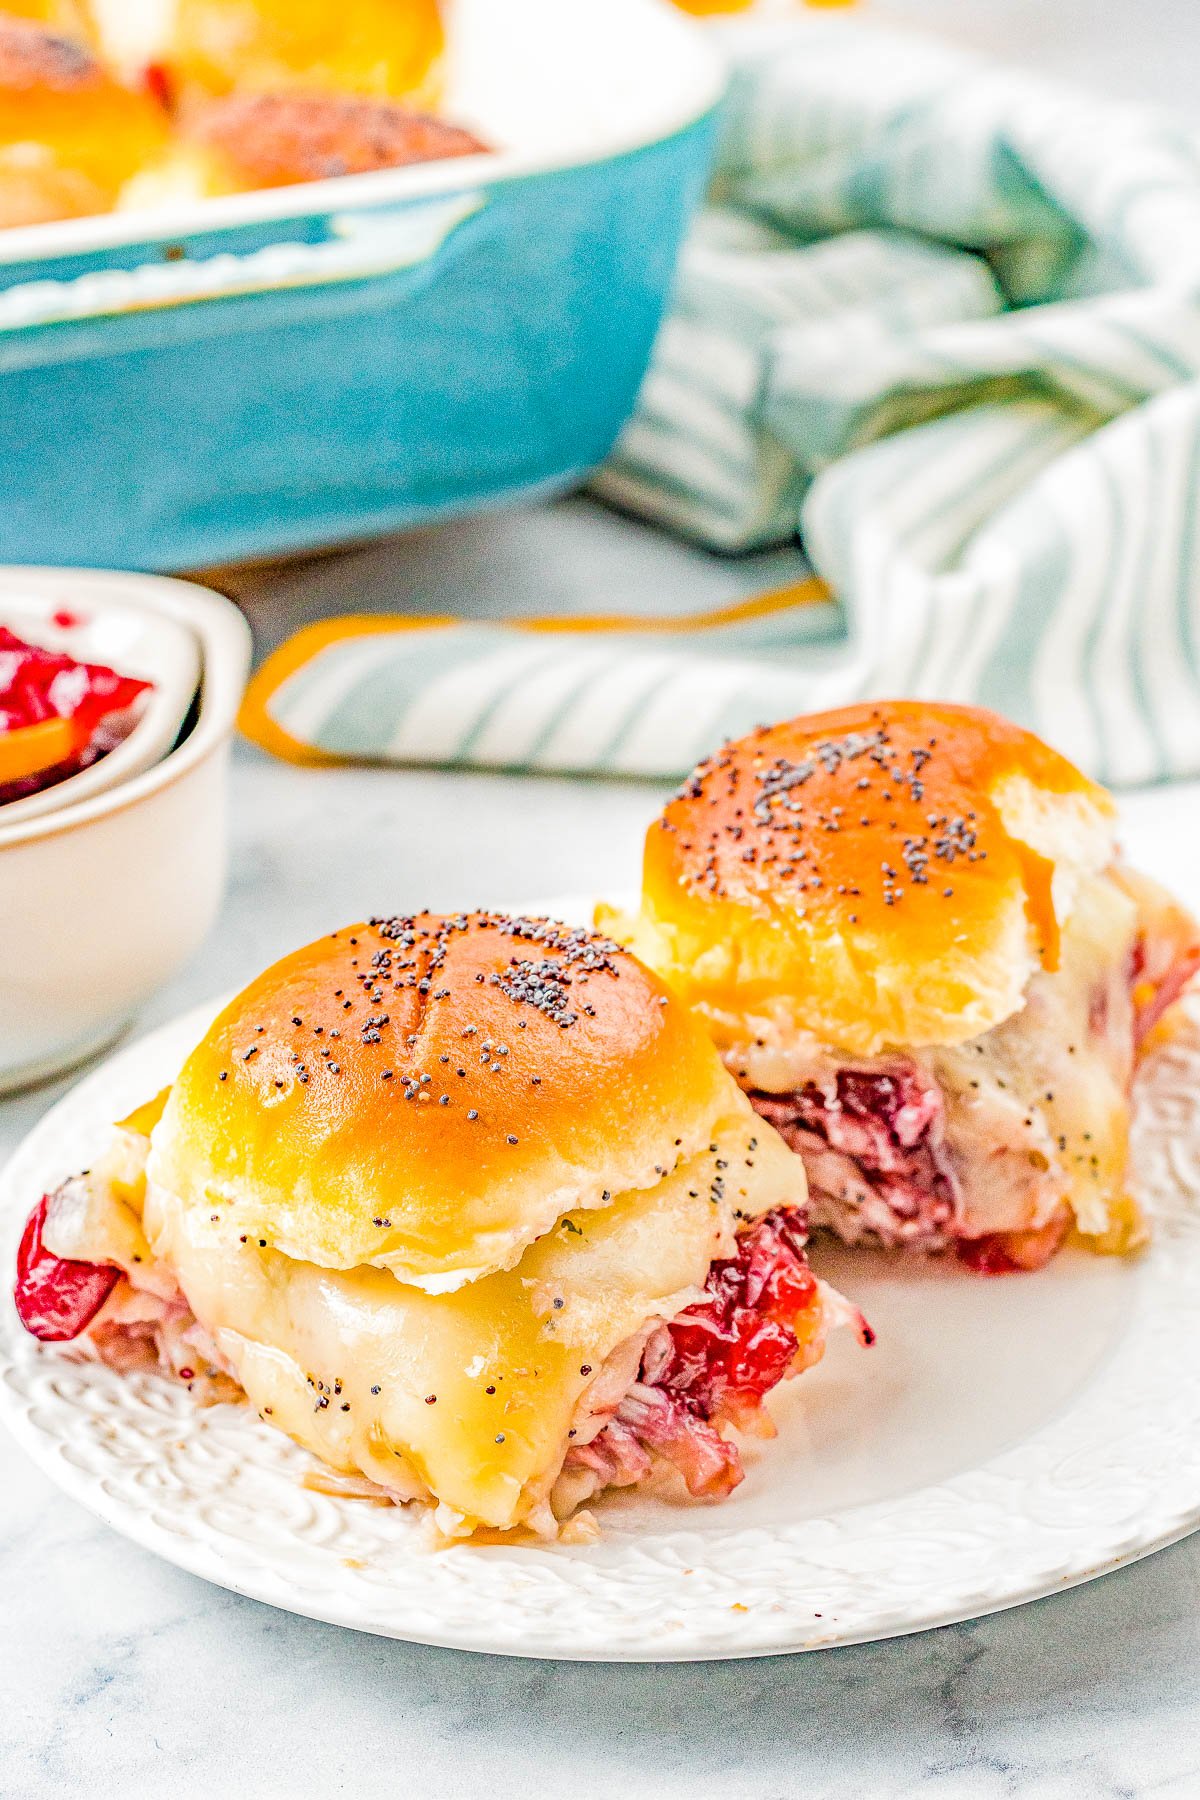 Turkey and Cheese Sliders - Juicy turkey, Swiss cheese, and cranberry sauce all nestled in soft Hawaiian rolls that are brushed with butter and topped with poppy seeds for the BEST turkey sliders! FAST, EASY, and takes advantage of leftover turkey! Deli turkey also works.